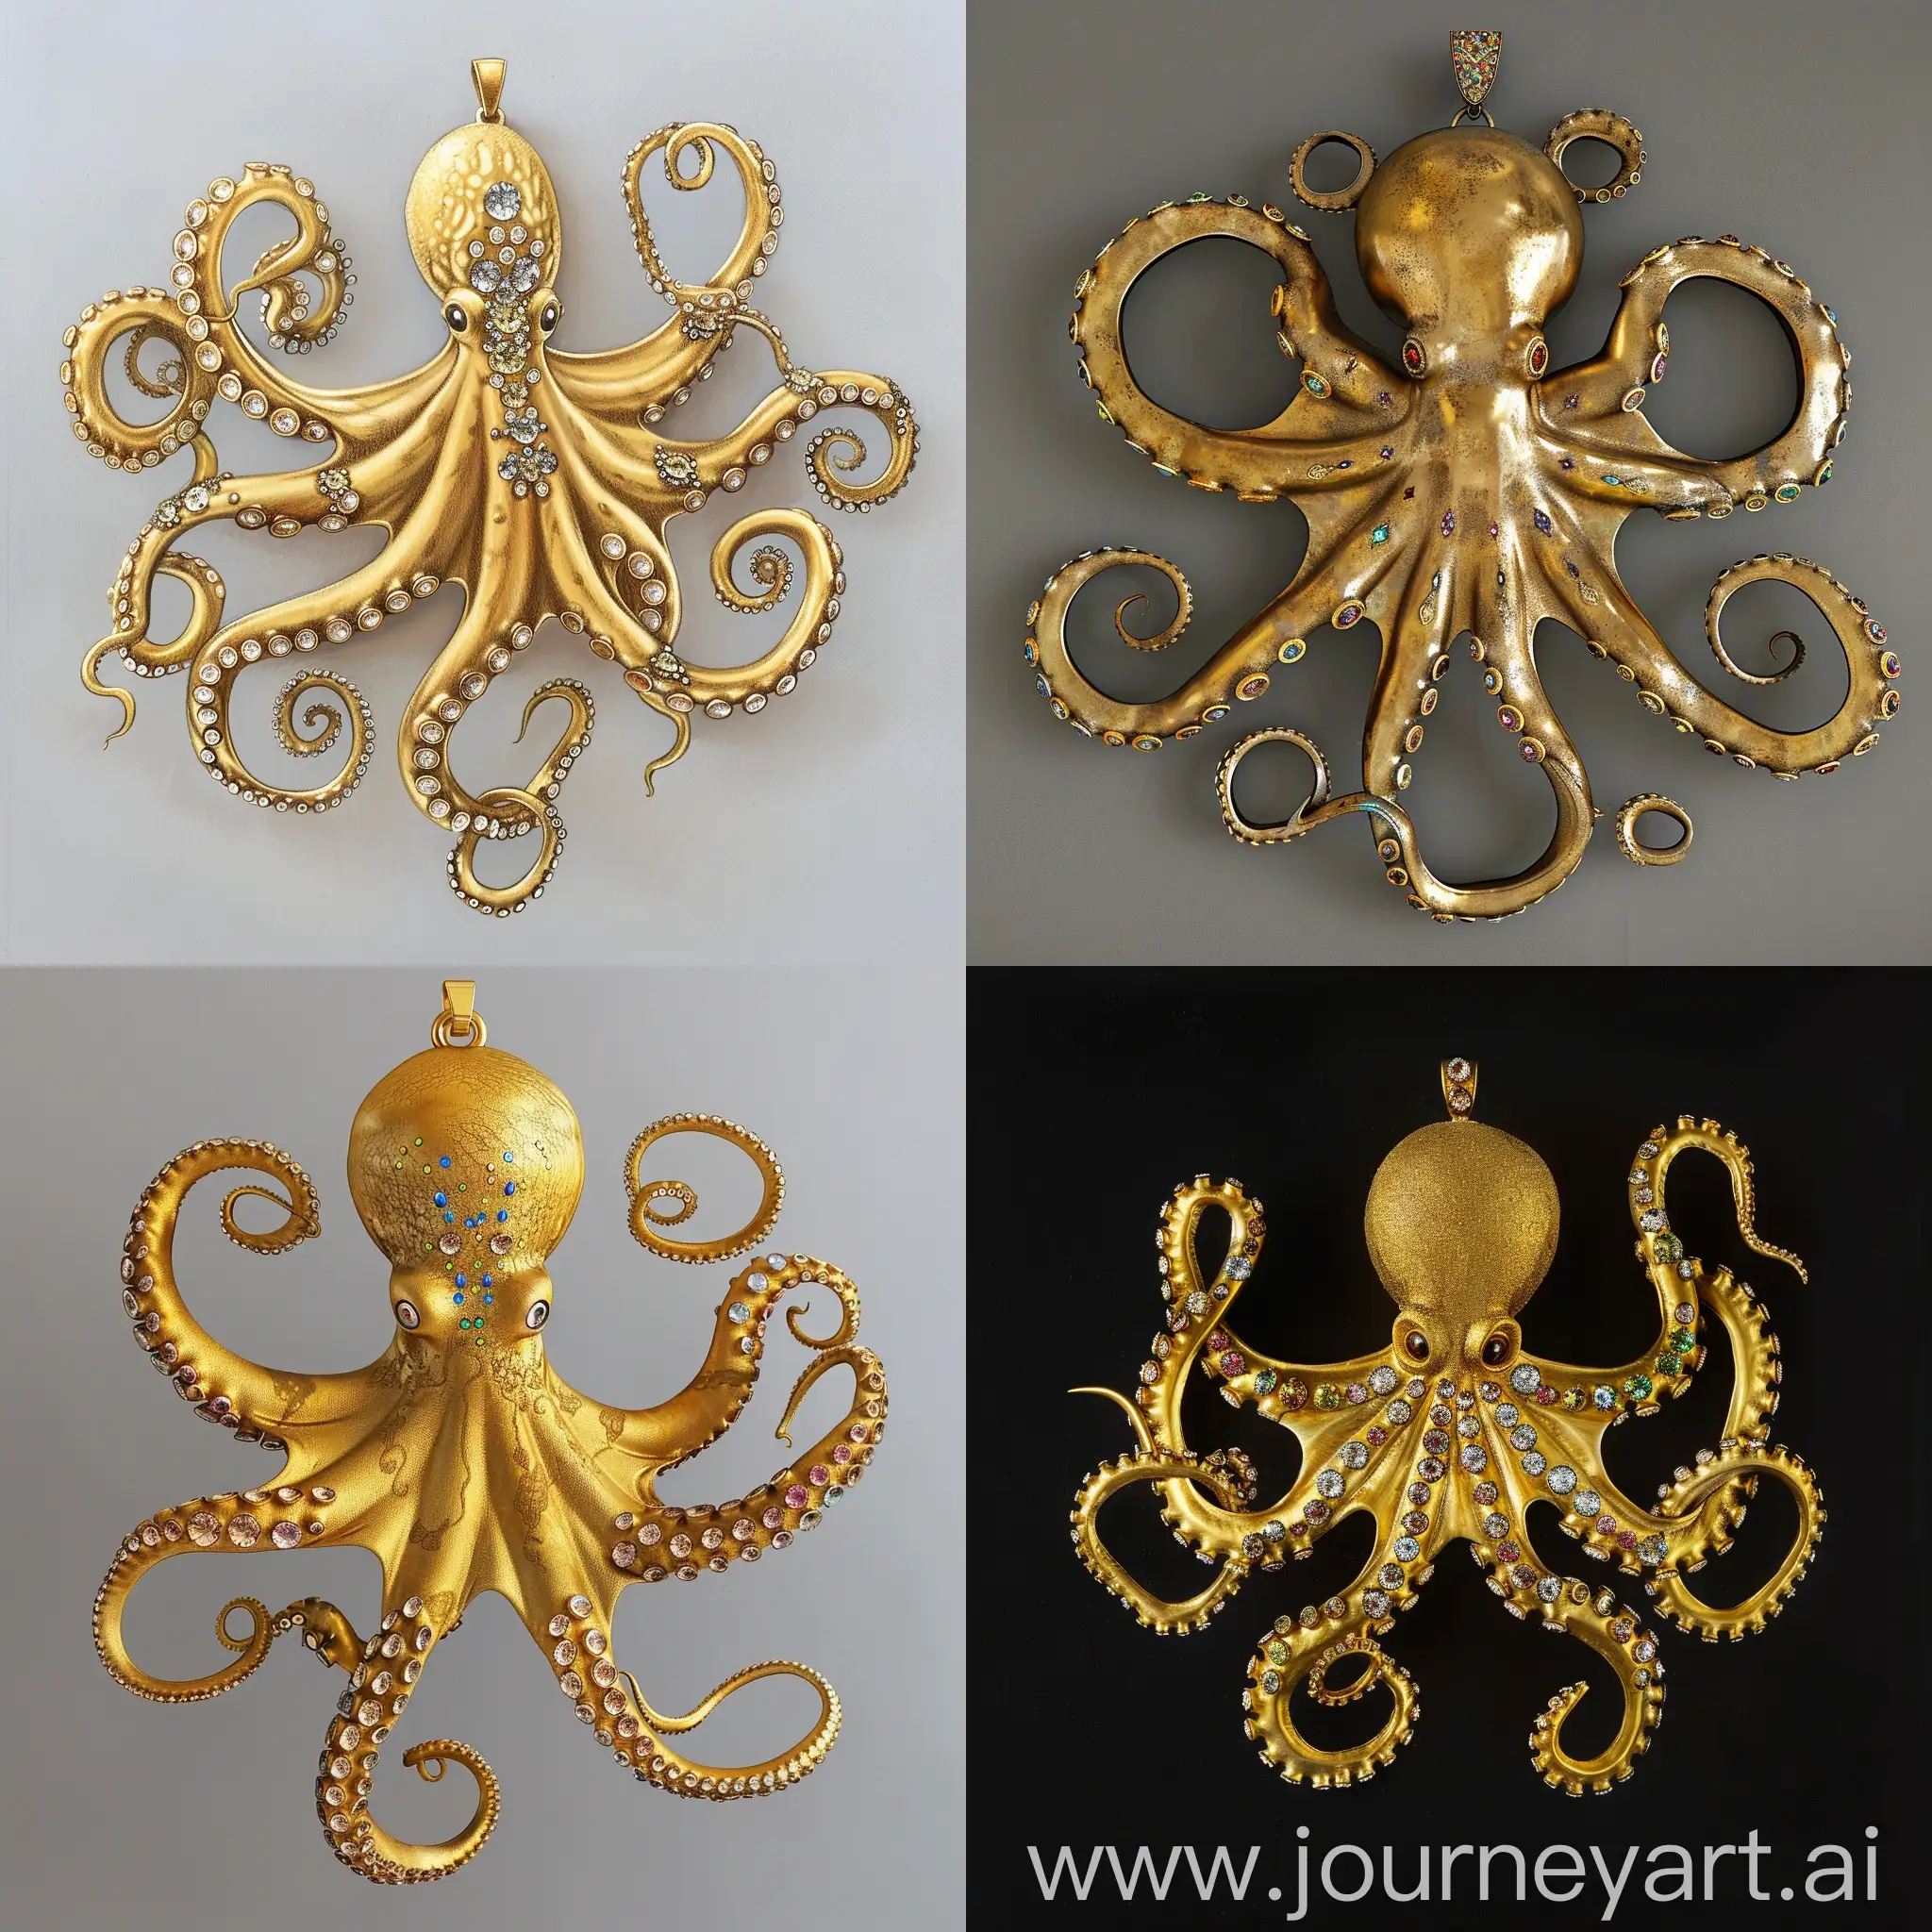 Exquisite-Gold-Octopus-Pendant-with-Jeweled-Arms